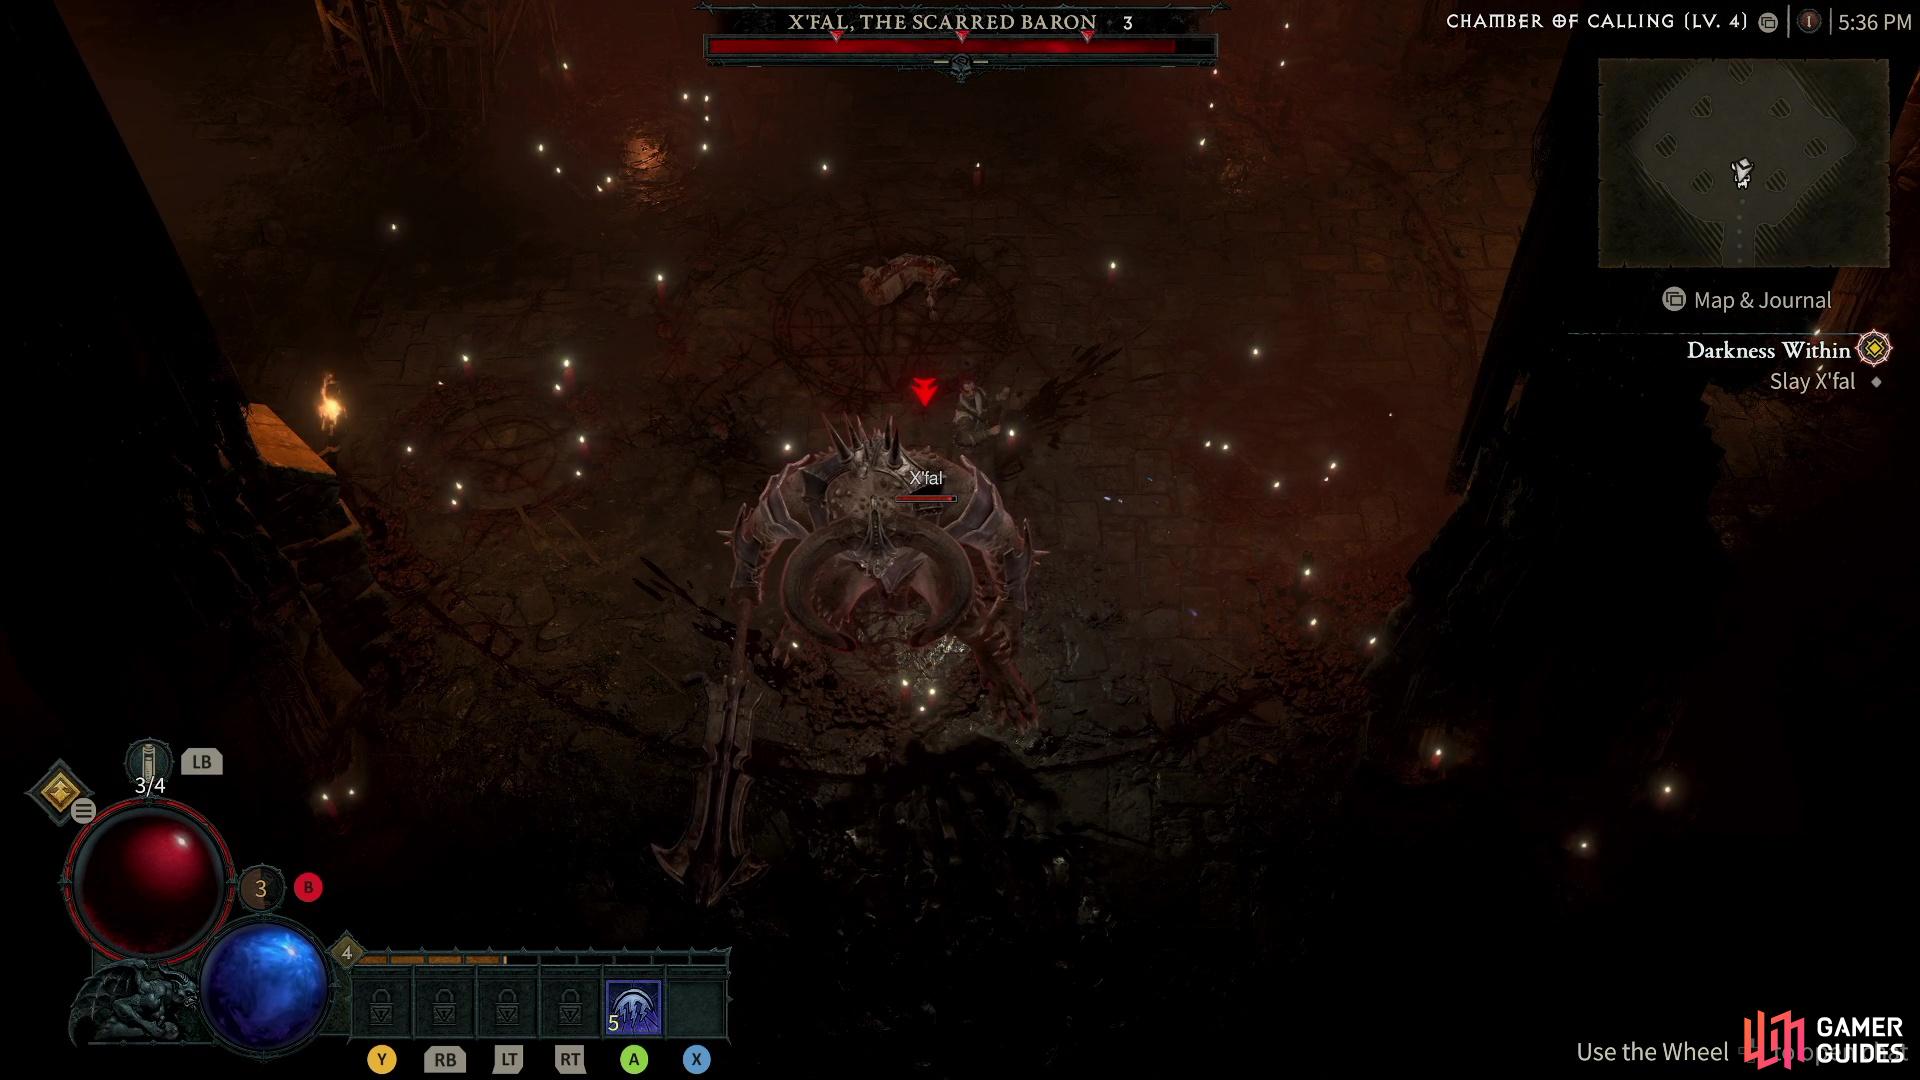 Dodging attacks and hitting X’Fal, The Scarred Baron is a solid strategy for the first Diablo IV Boss Fight.